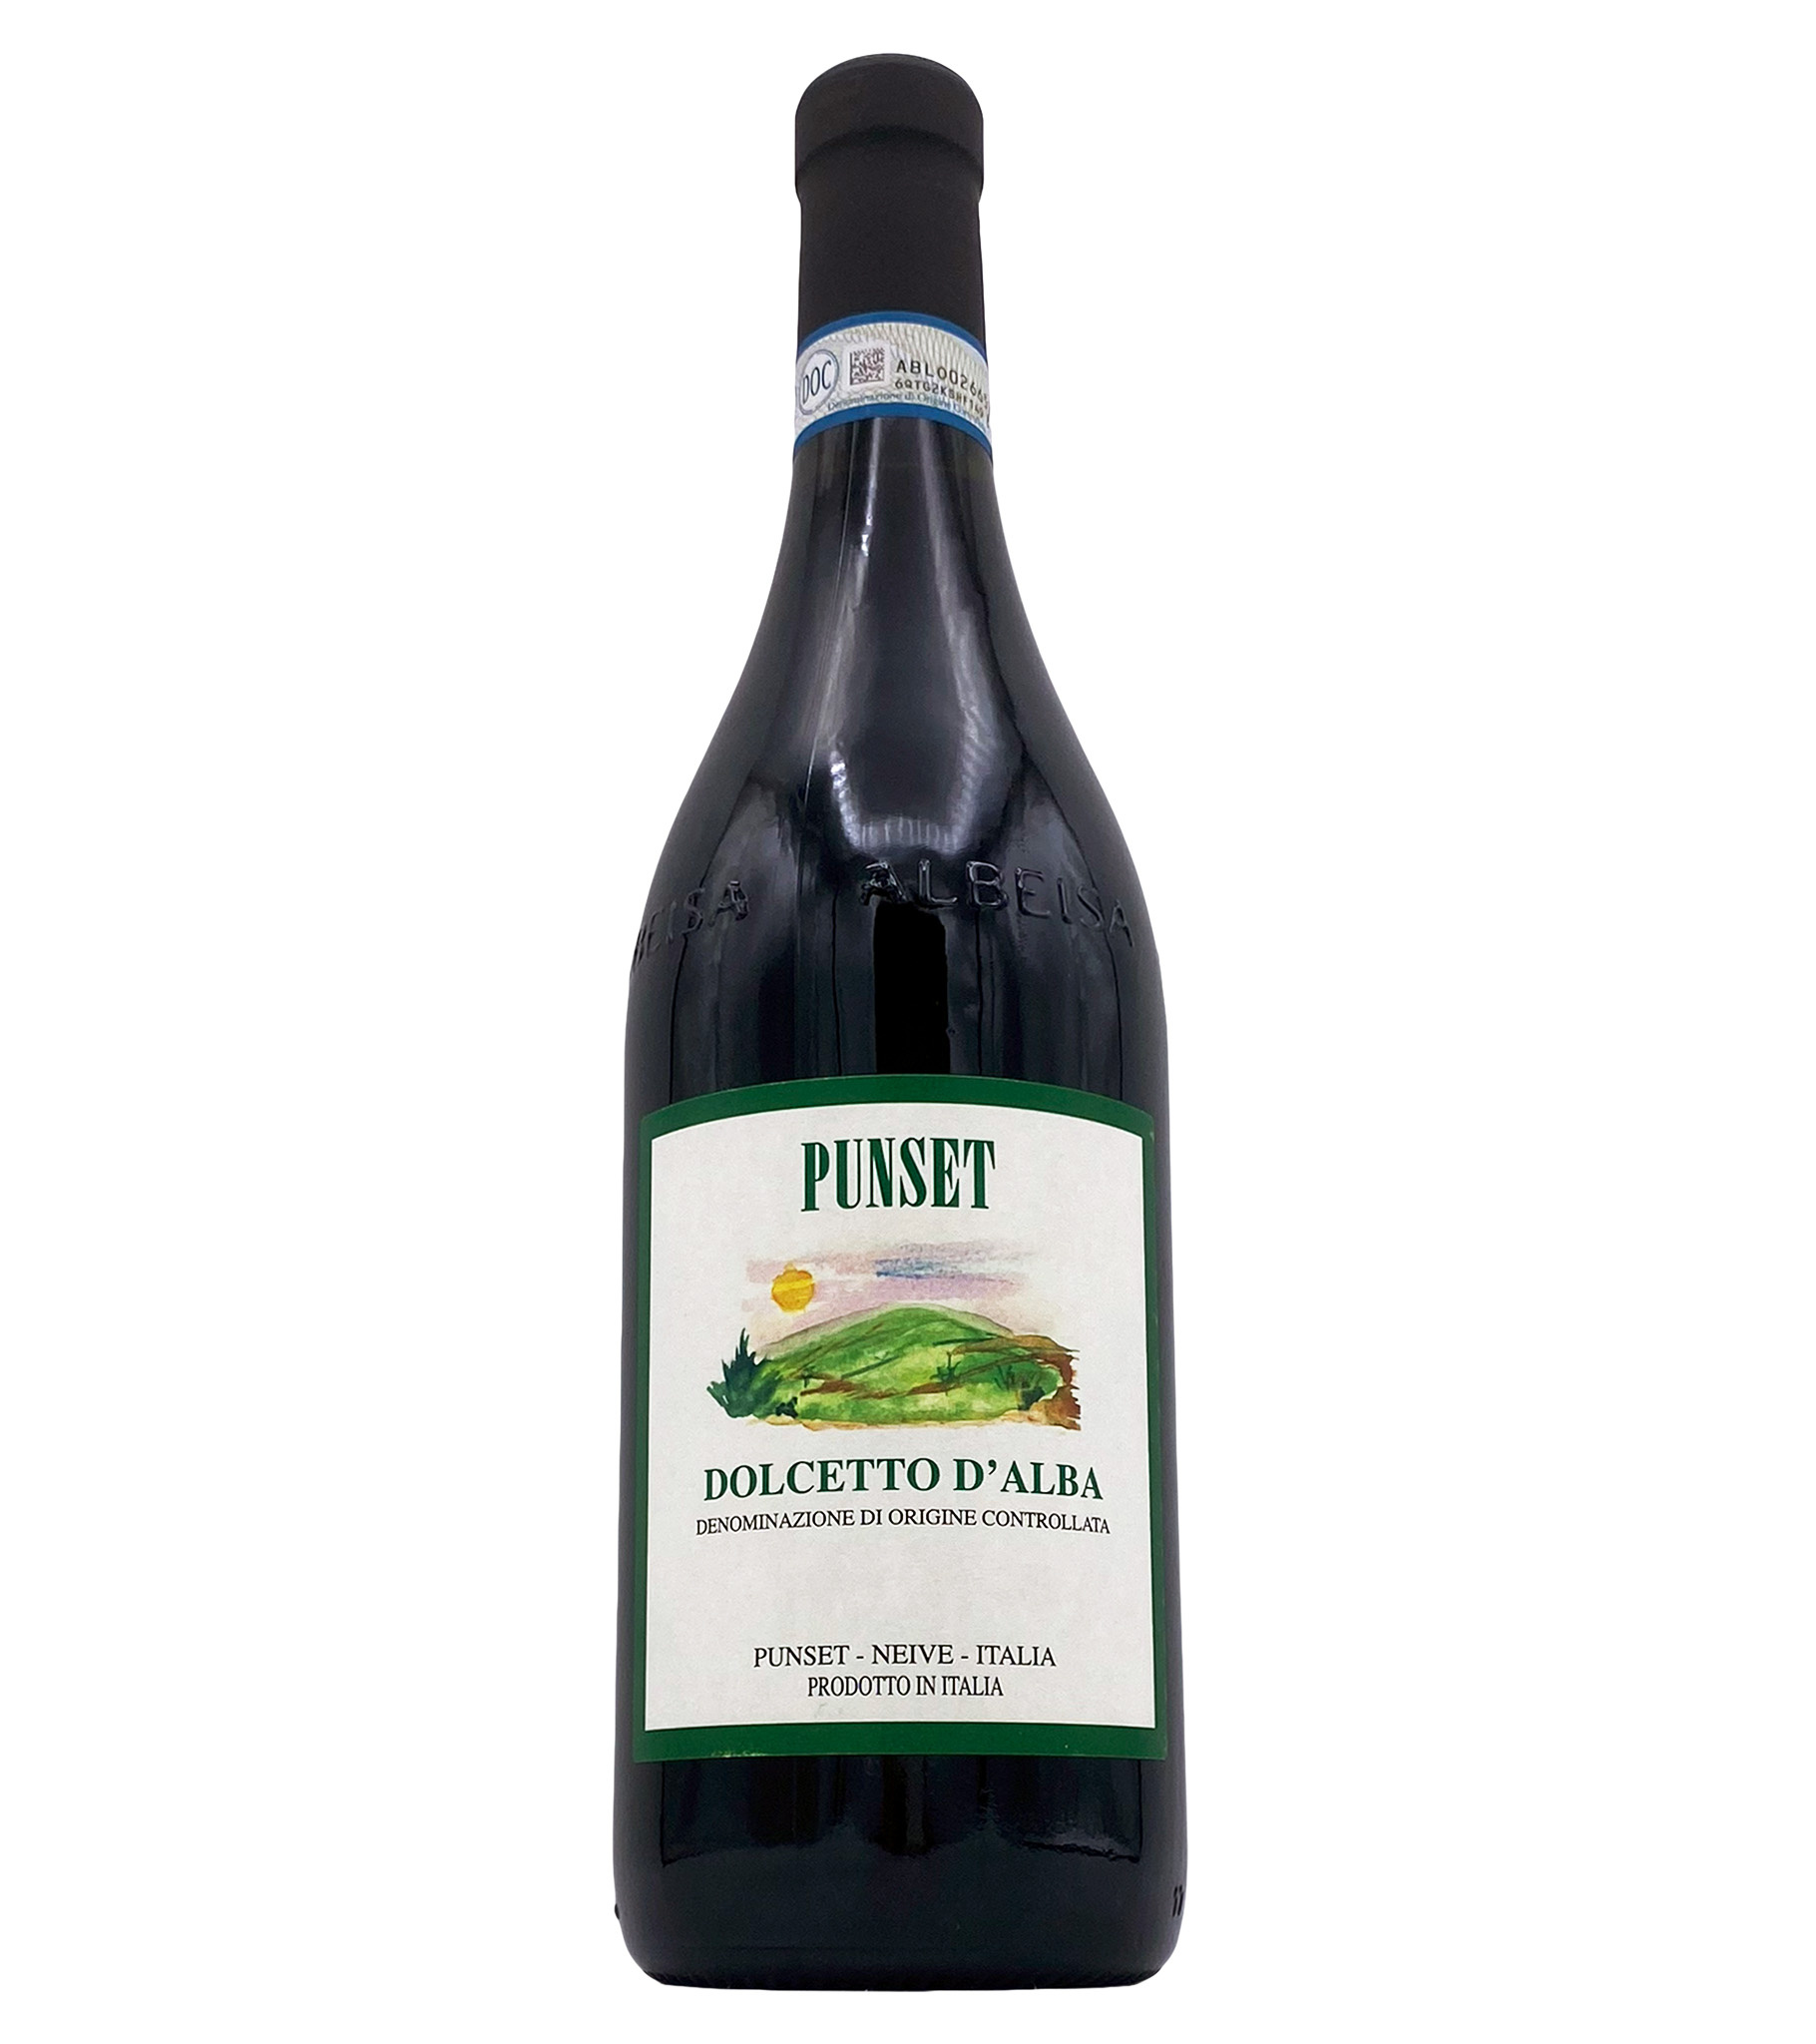 Dolcetto d'Alba 2019 Punset